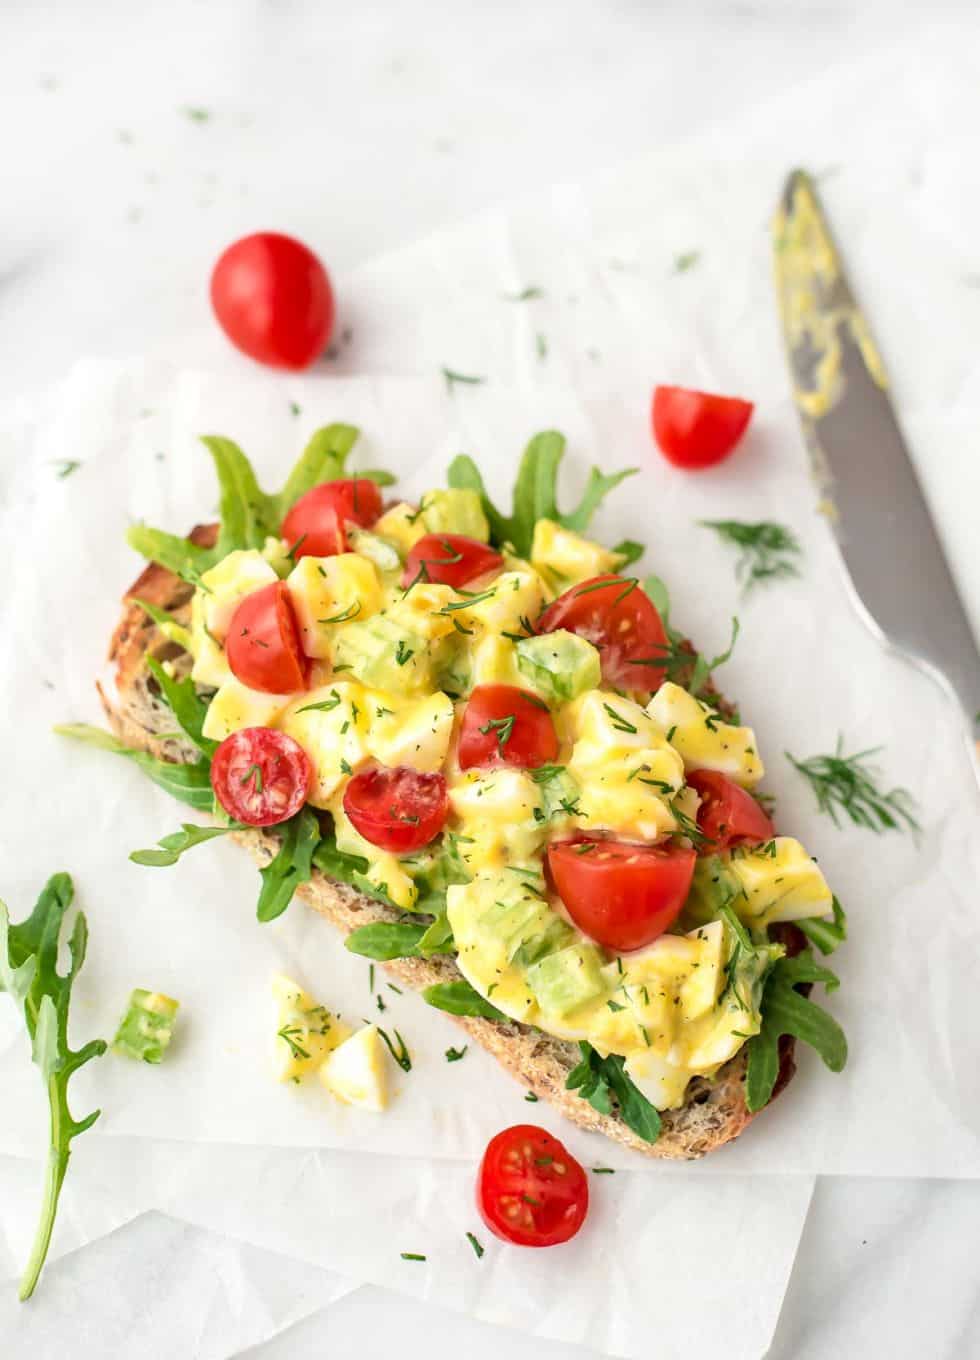 15 Healthy Egg Recipes For Any and All Meals